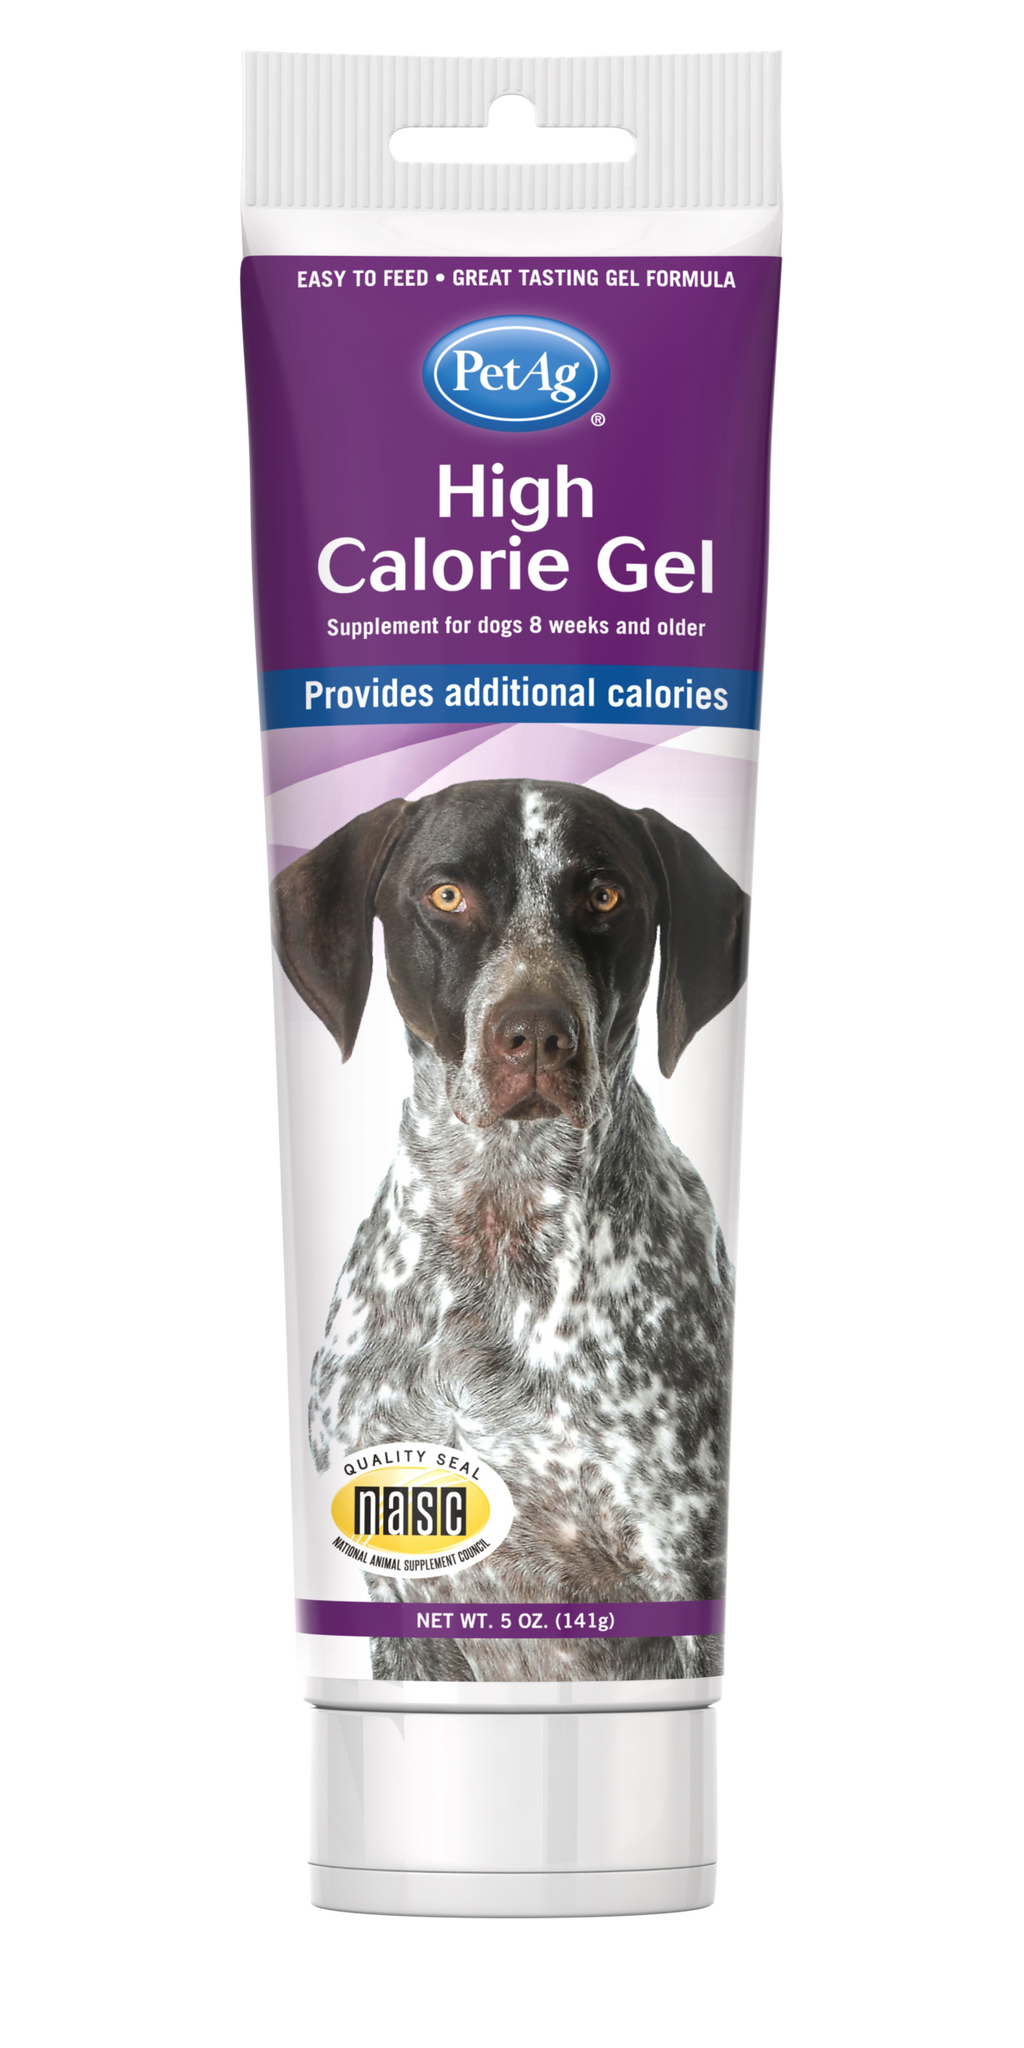 PetAg High Calorie Gel Supplement for Dogs